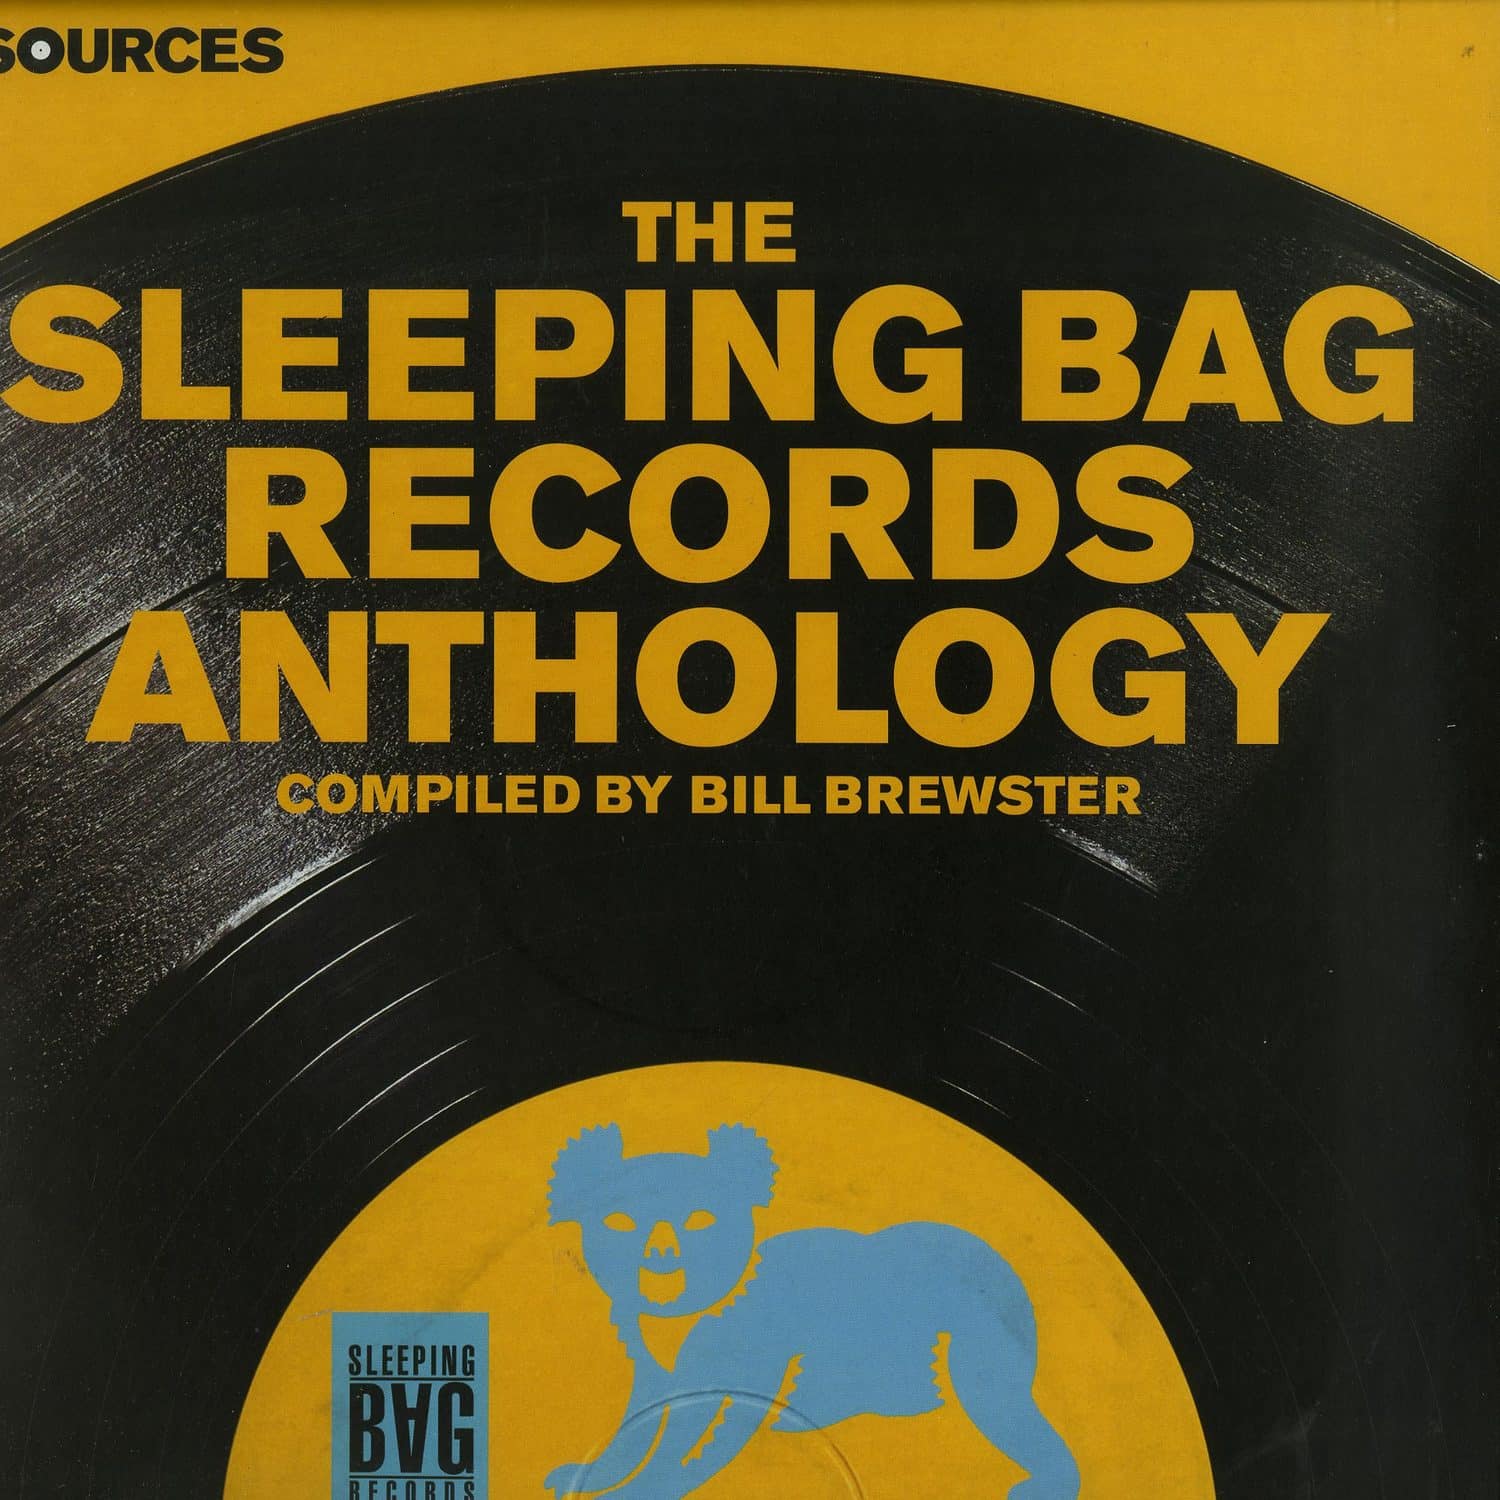 V/A  - SOURCES : THE SLEEPING BAG RECORDS ANTHOLOGY 